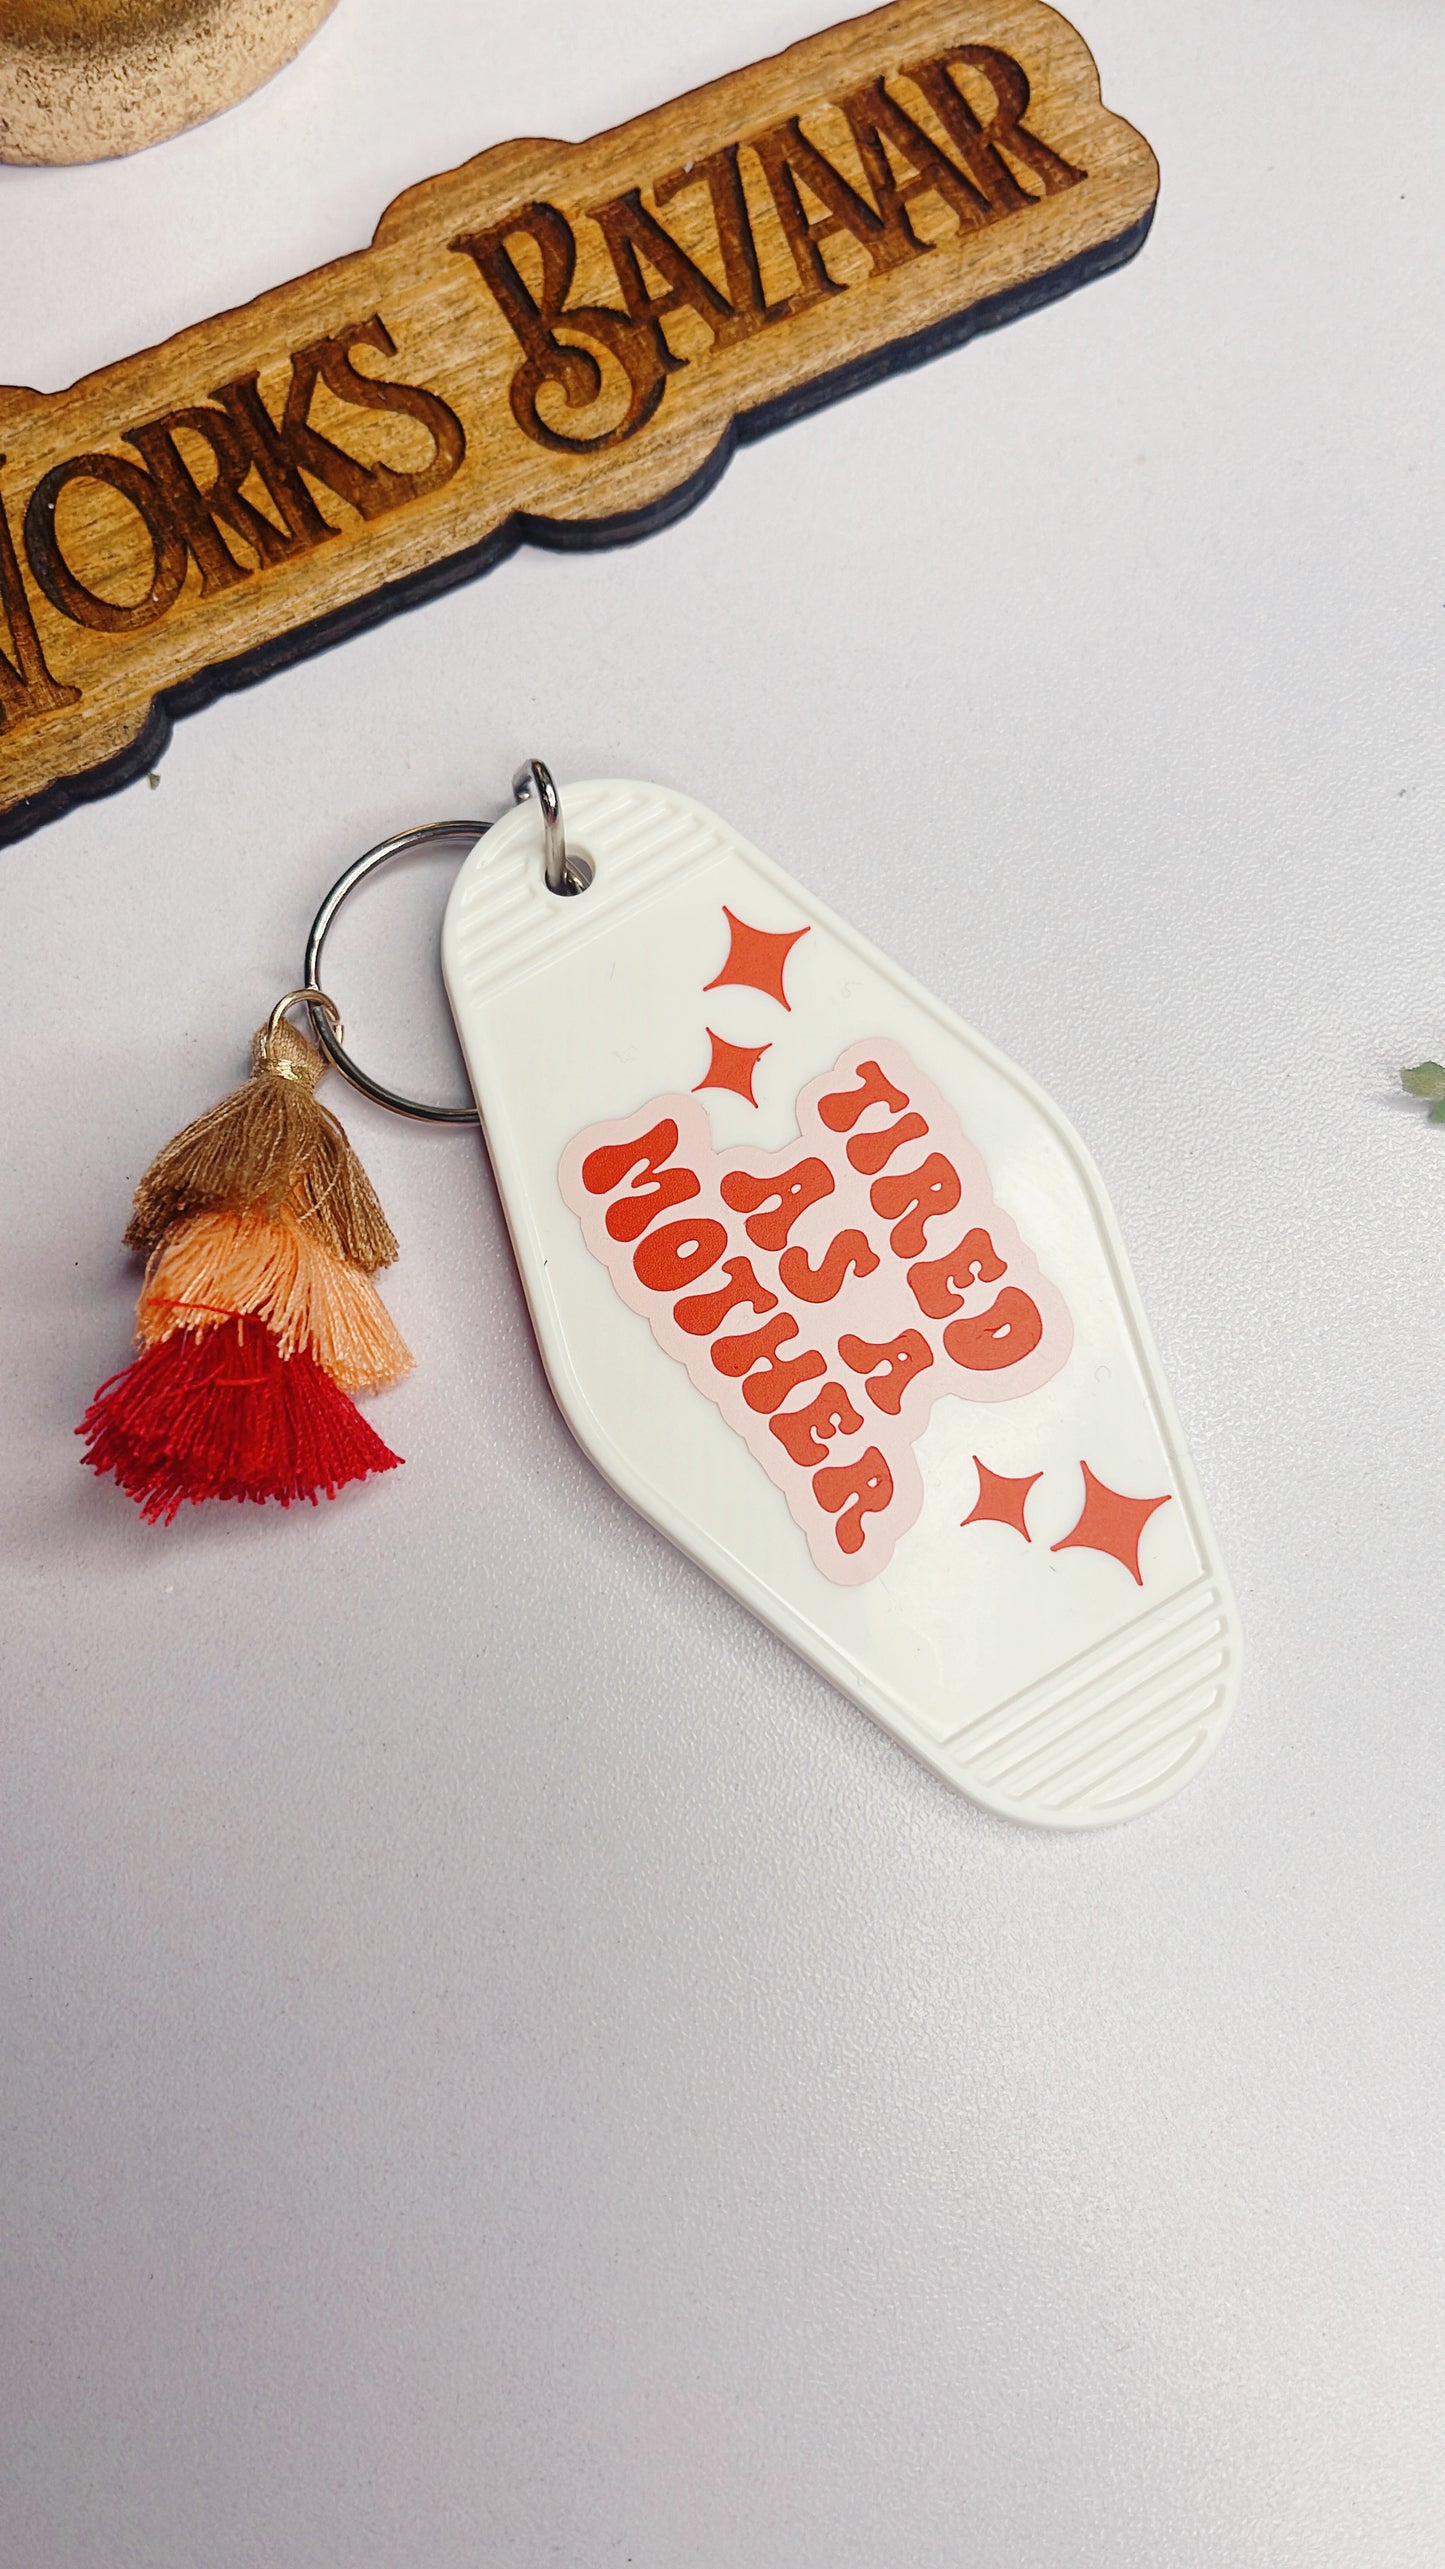 Tired as a Mother - Motel Keychain (PRE-ORDER)